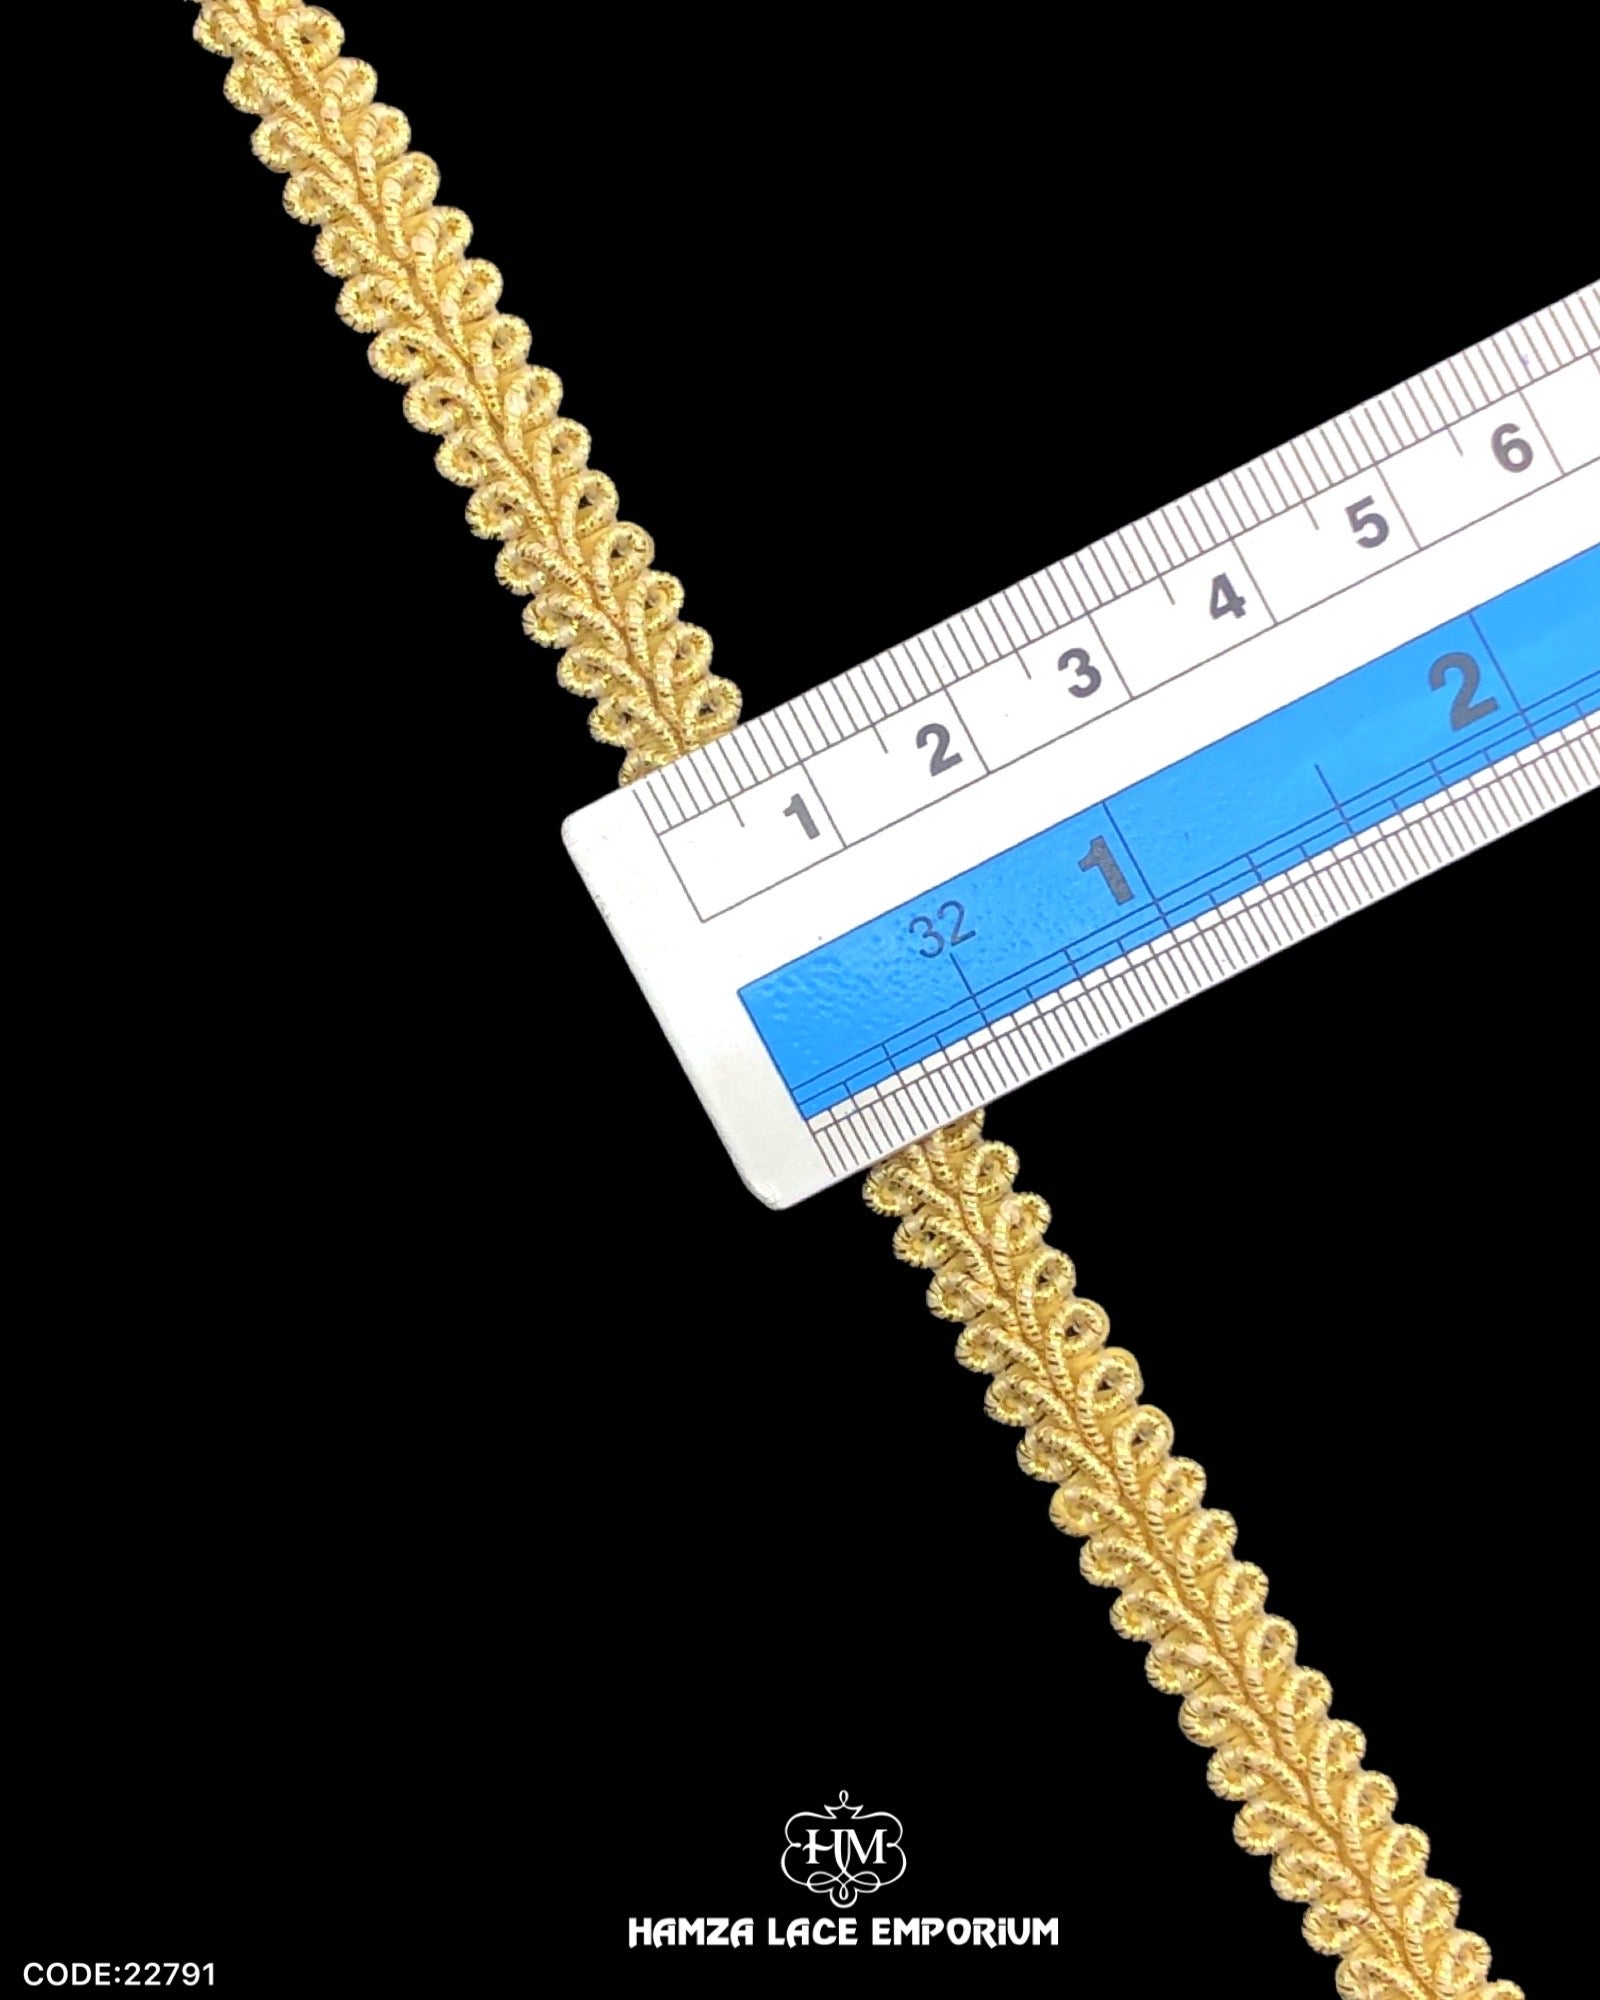 Size of the 'Center Filling Lace 22788' is displayed with the help of a ruler as '0.25' inches